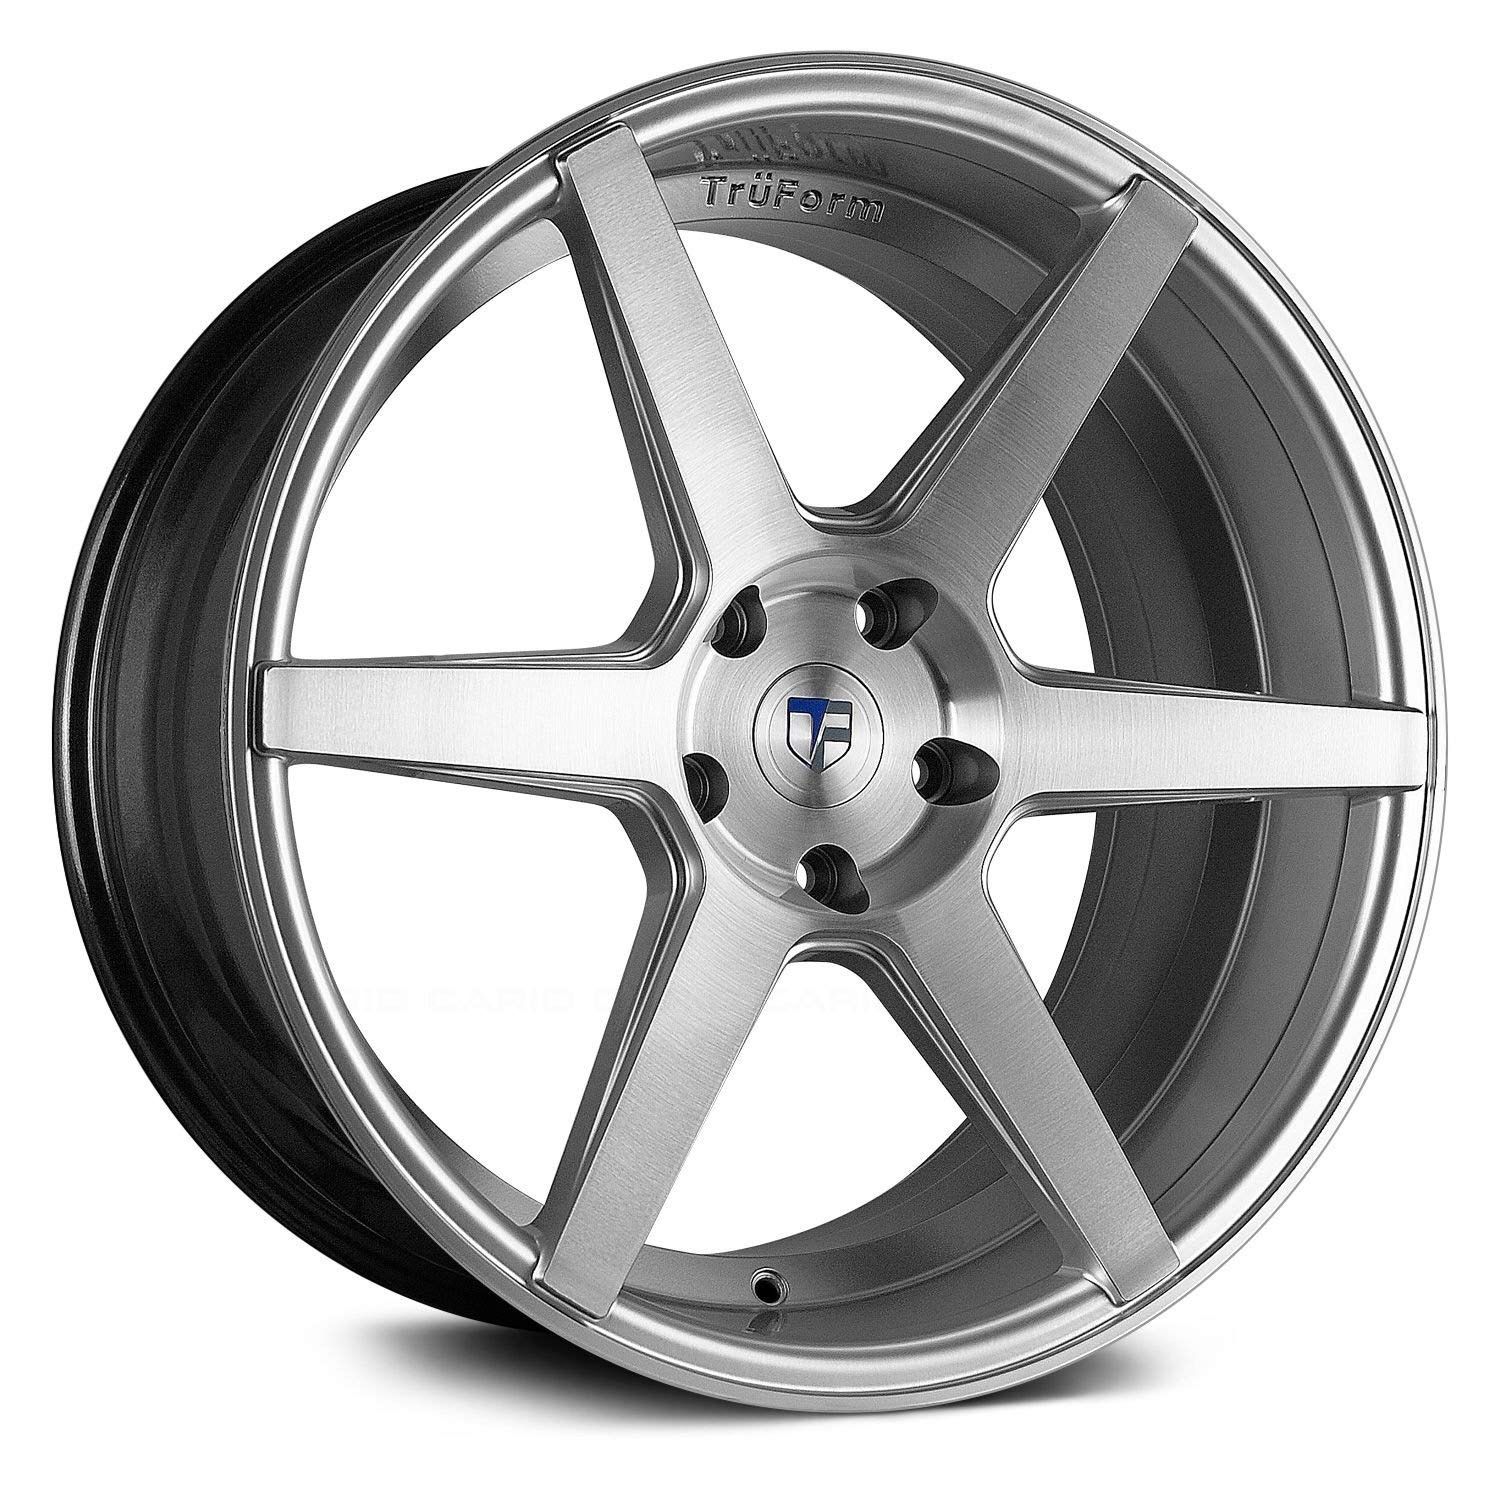 20” TruForm Rims Get Approved for Finance Now ! NO CREDIT CHECK